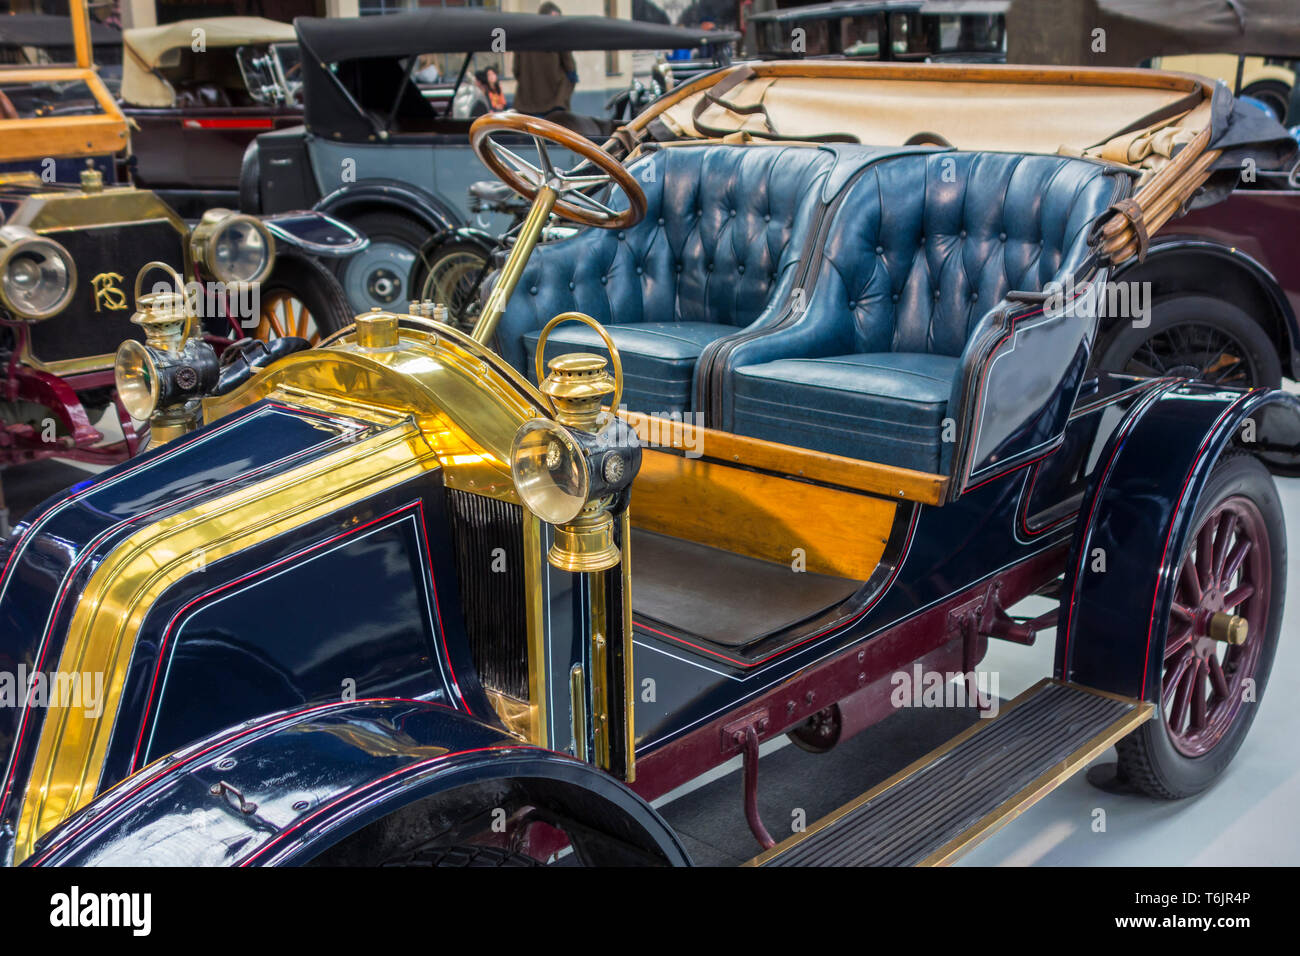 1909 Renault Type AX, French two cylinder classic automobile / oldtimer / antique vehicle at Autoworld, vintage car museum in Brussels, Belgium Stock Photo